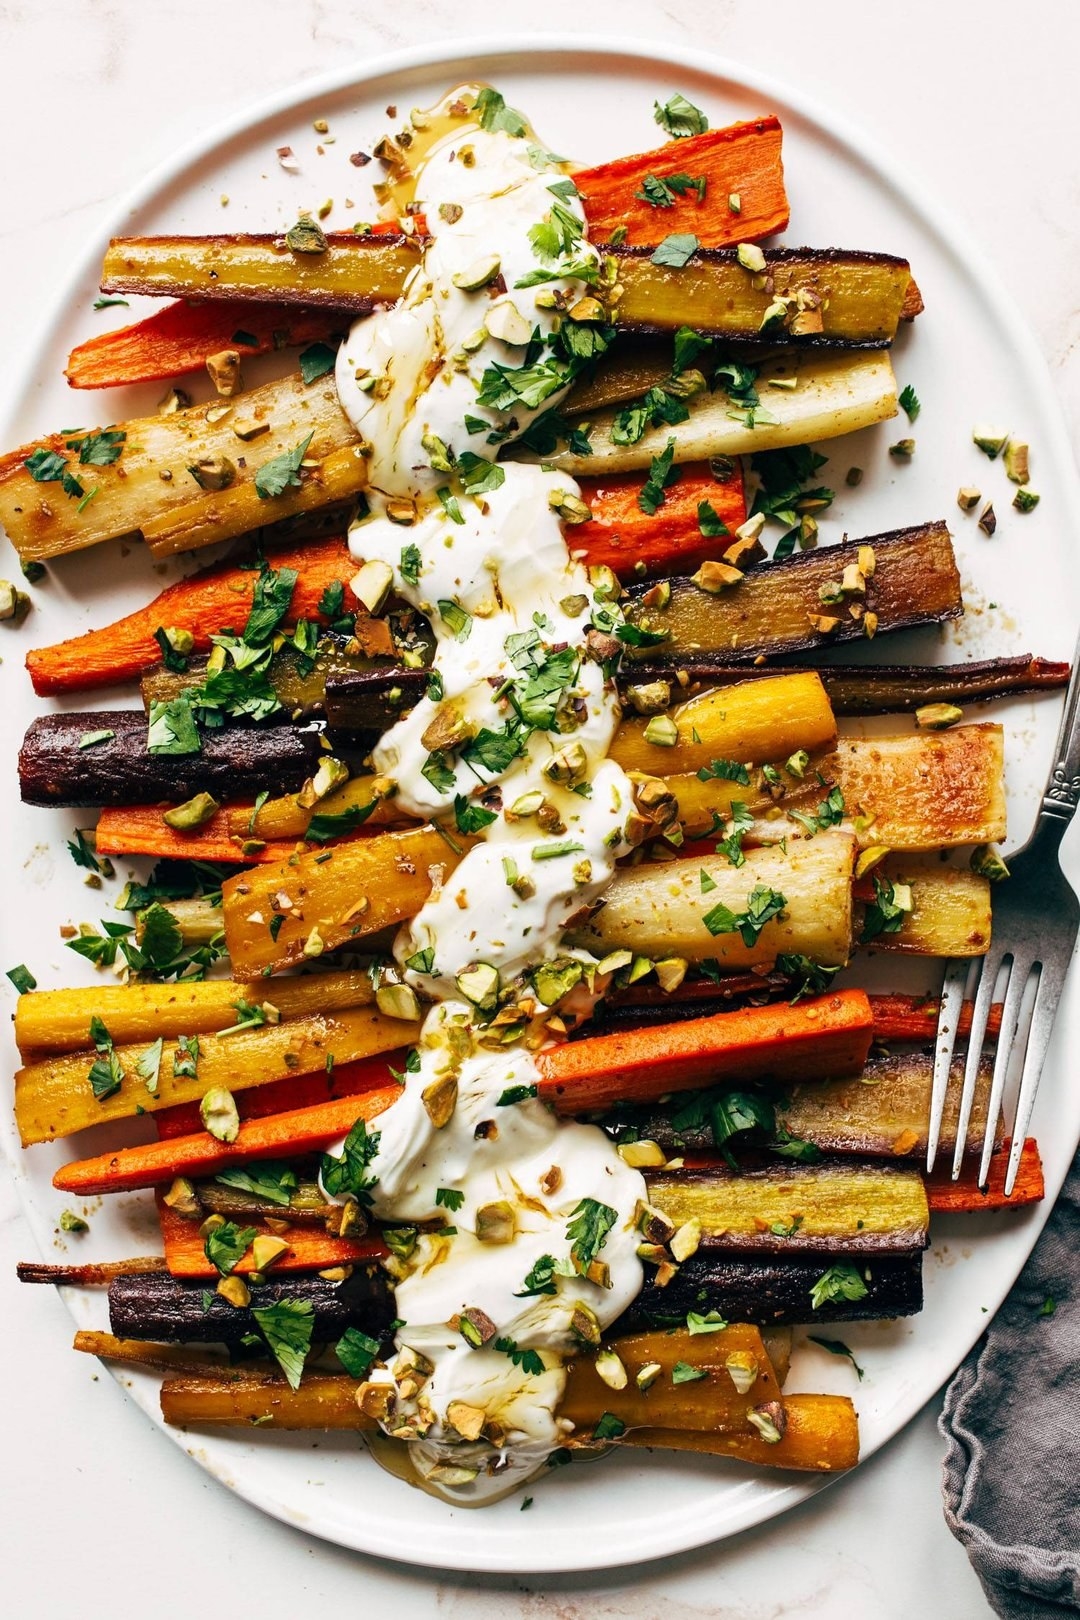 Roasted carrots with garlic sauce and nuts